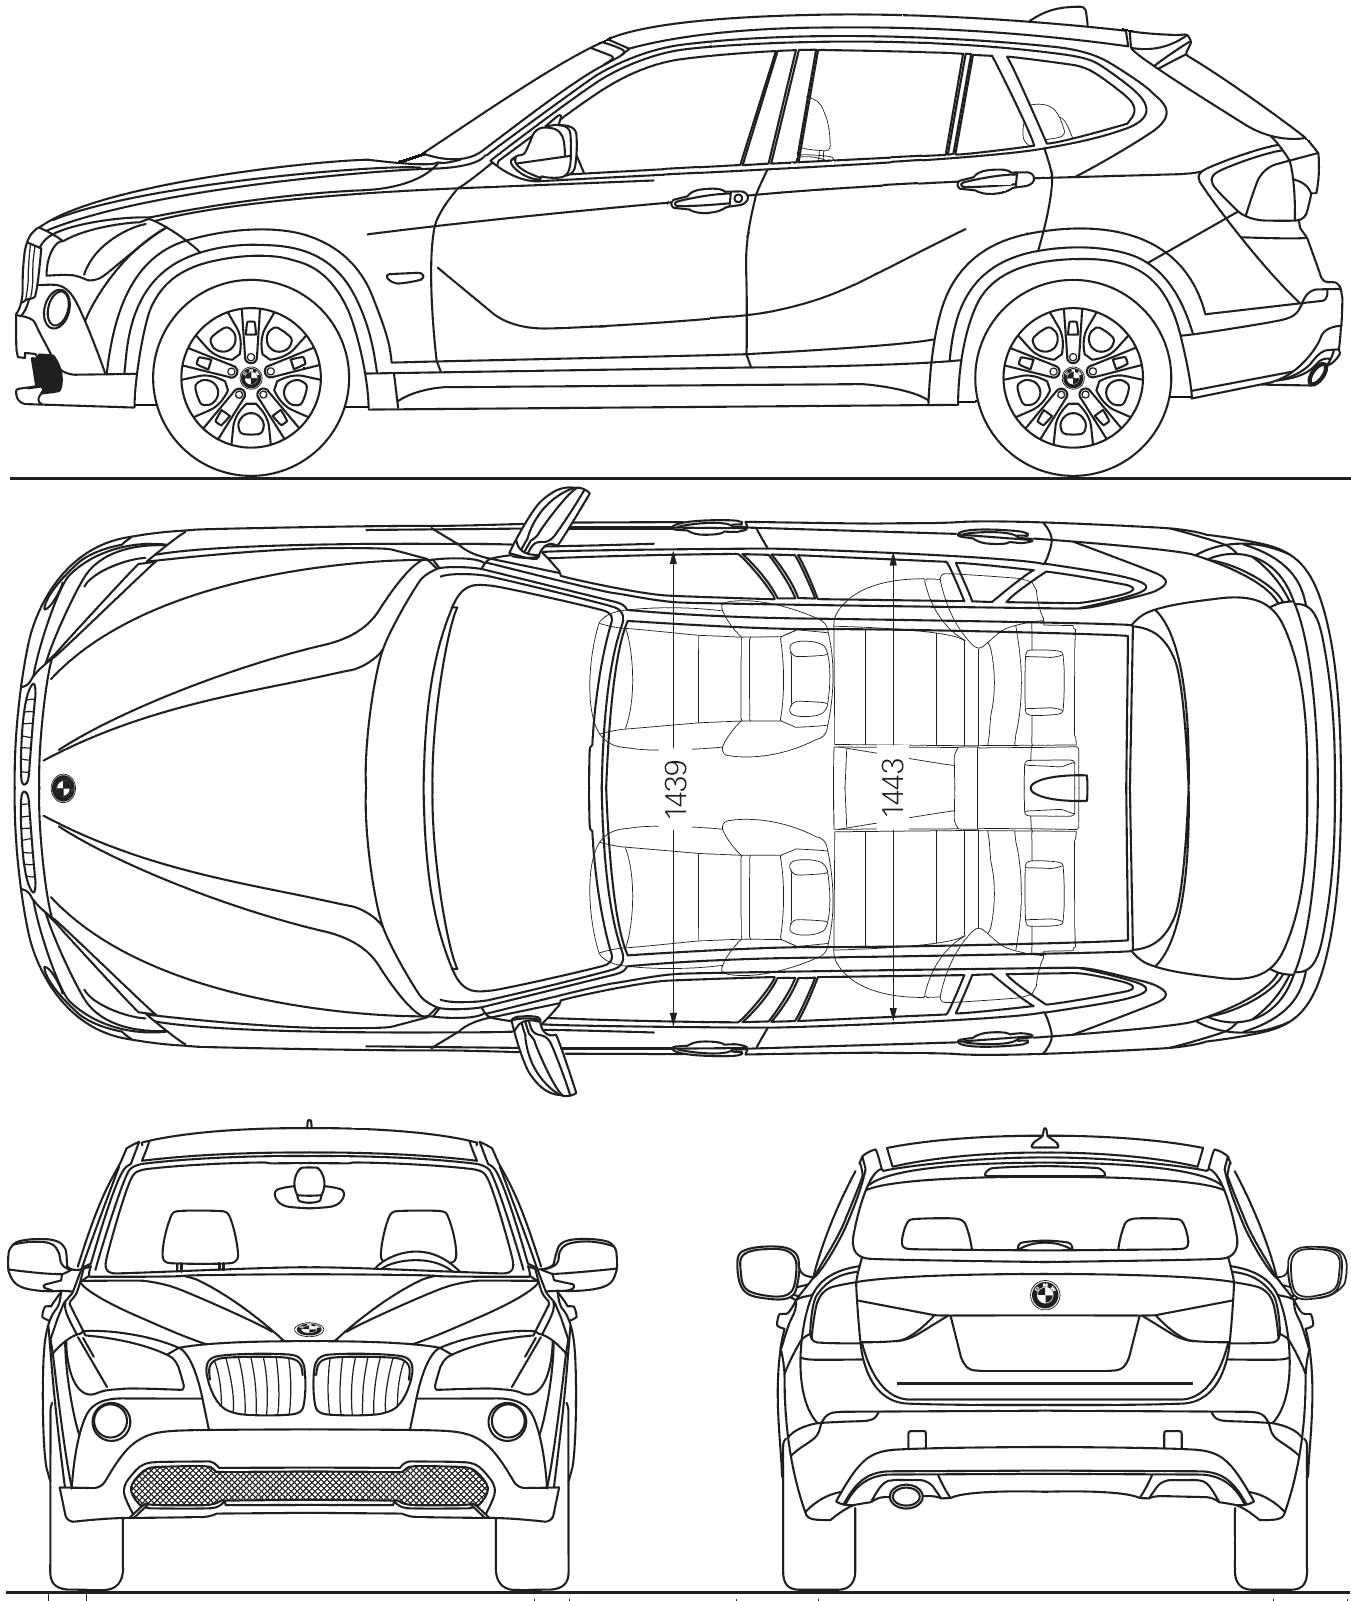 2009 BMW X1 SUV blueprints free - Outlines